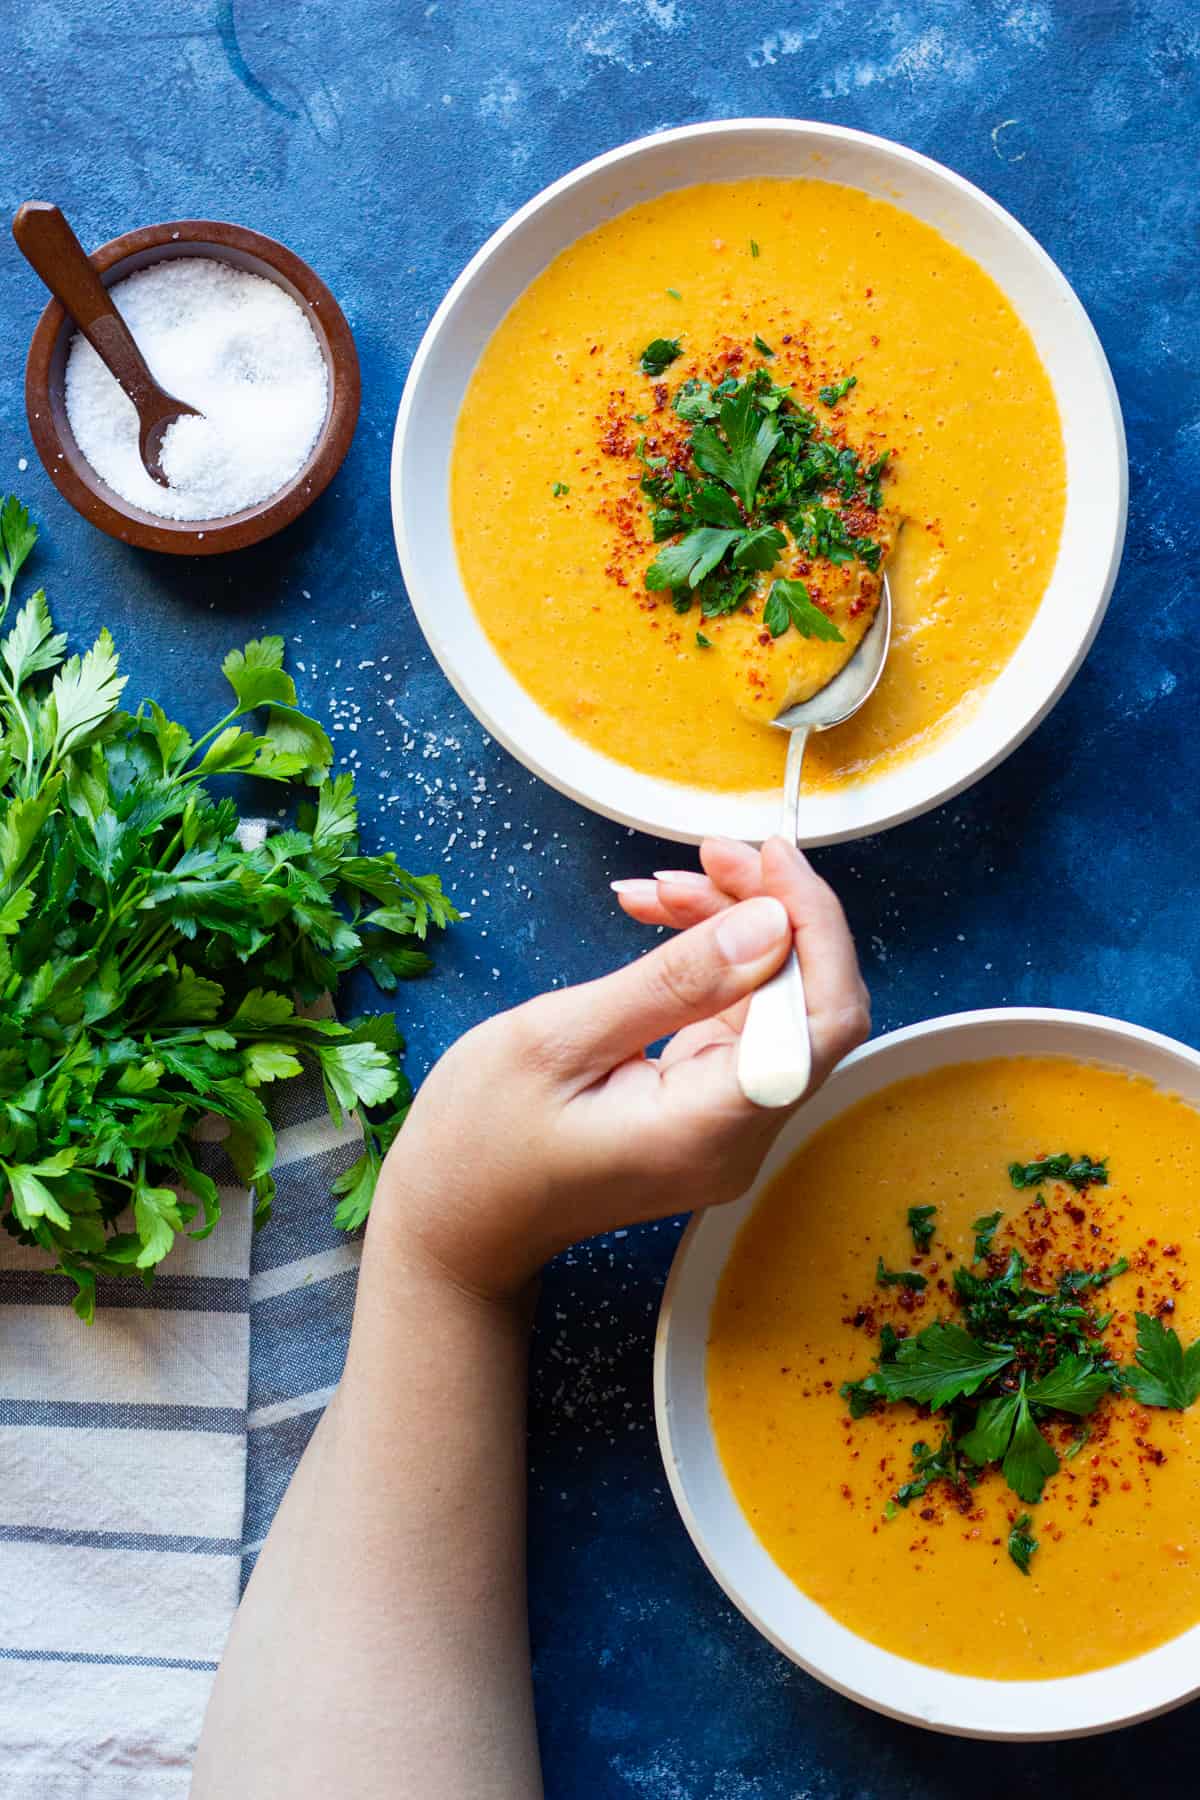 Turkish lentil soup is ready in 30 minutes and is so easy to make. You can make this healthy and delicious soup with just a handful of ingredients.
